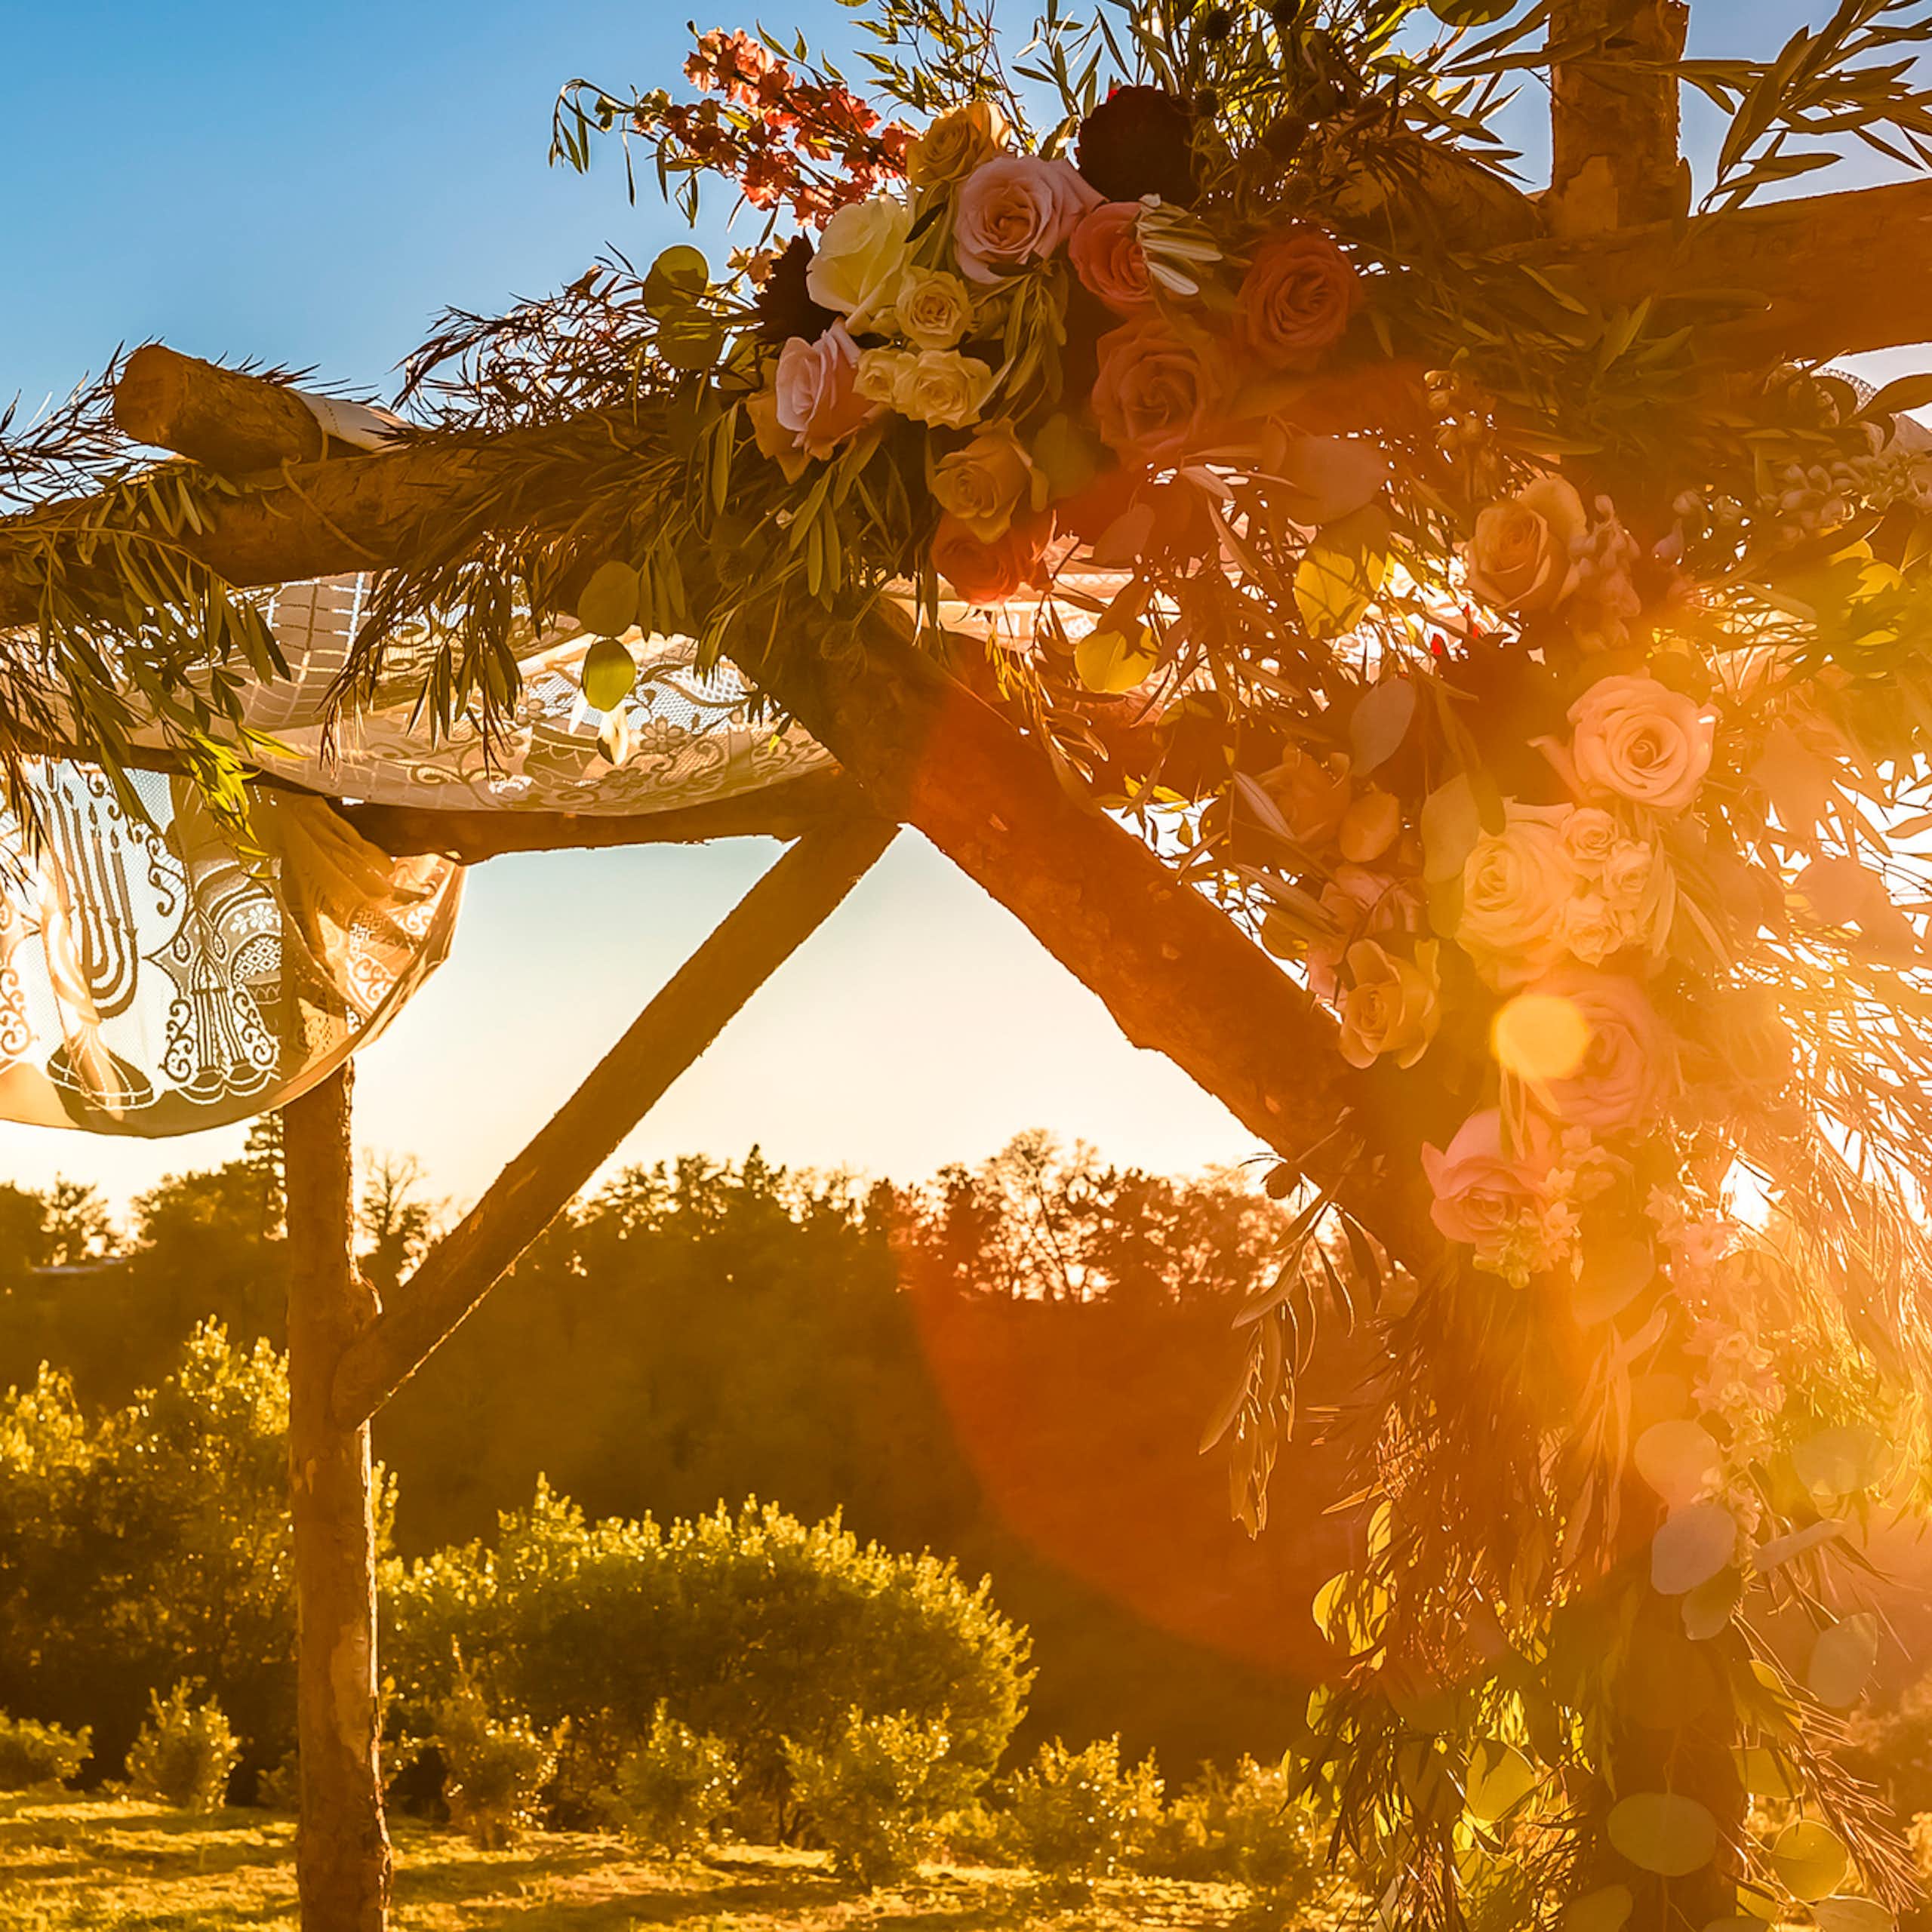 The sun begins to set hazily behind a simple wooden canopy adorned with flowers.